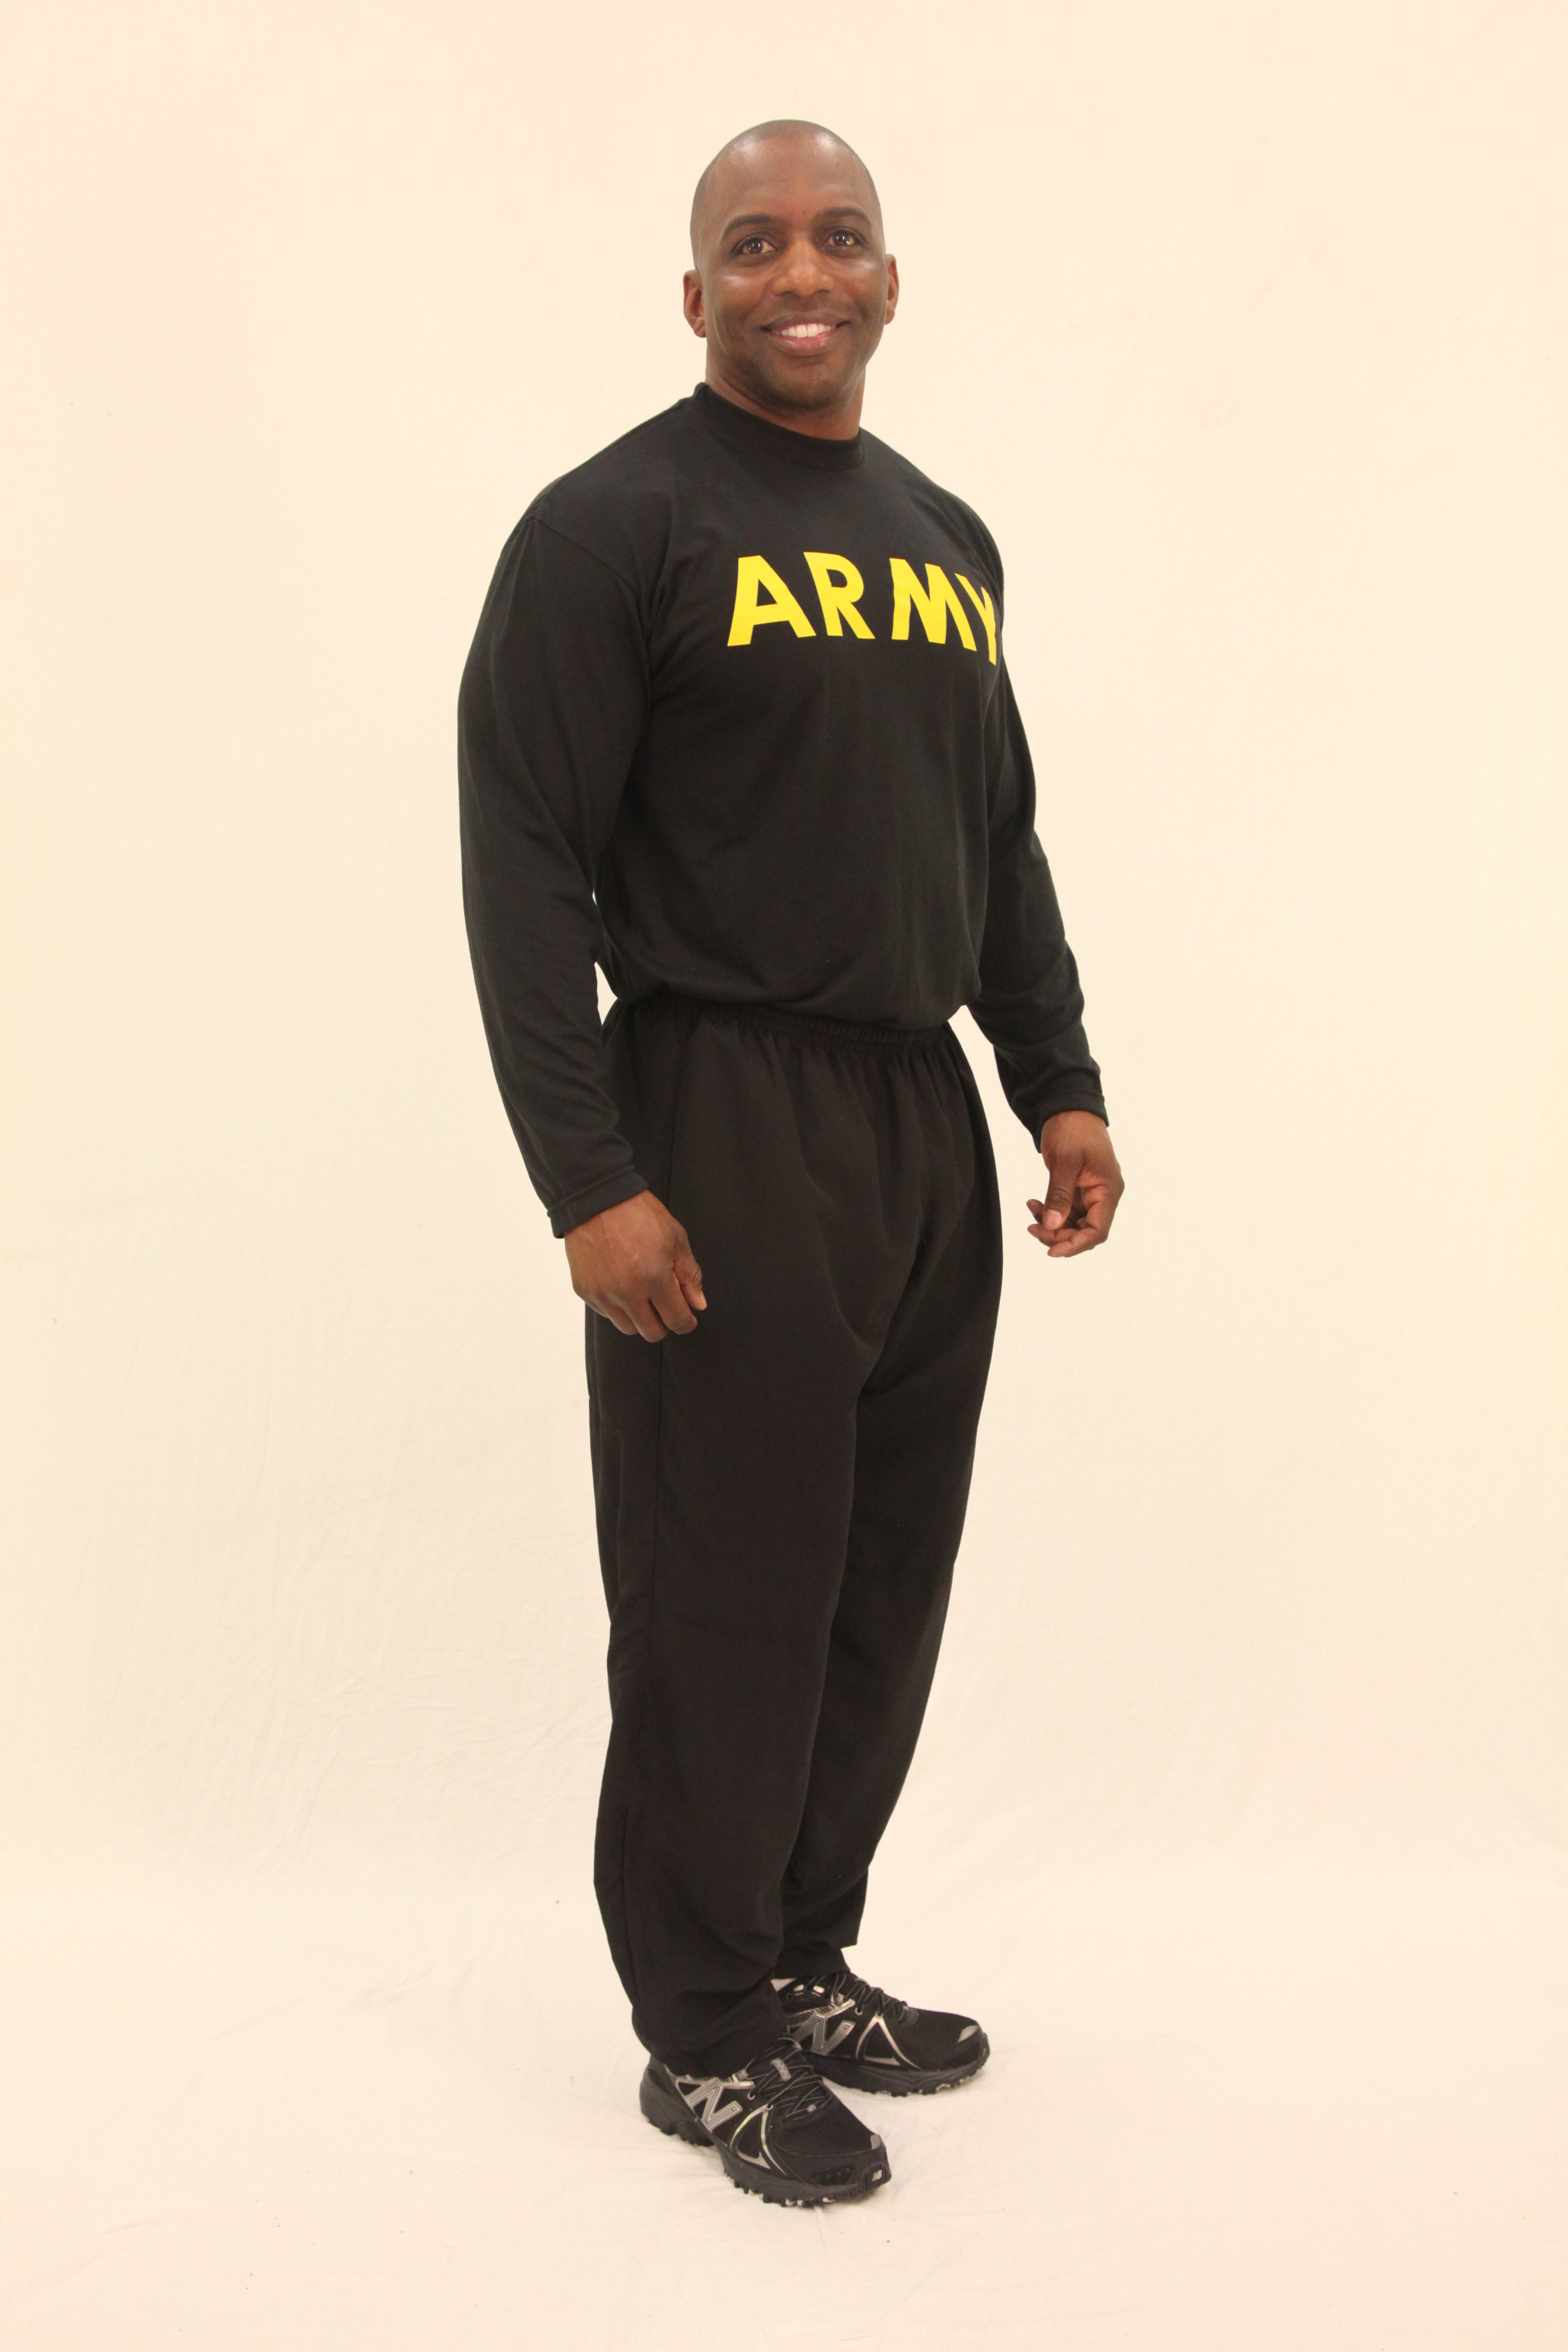 New Army PT uniforms result of Soldier feedback Article The United